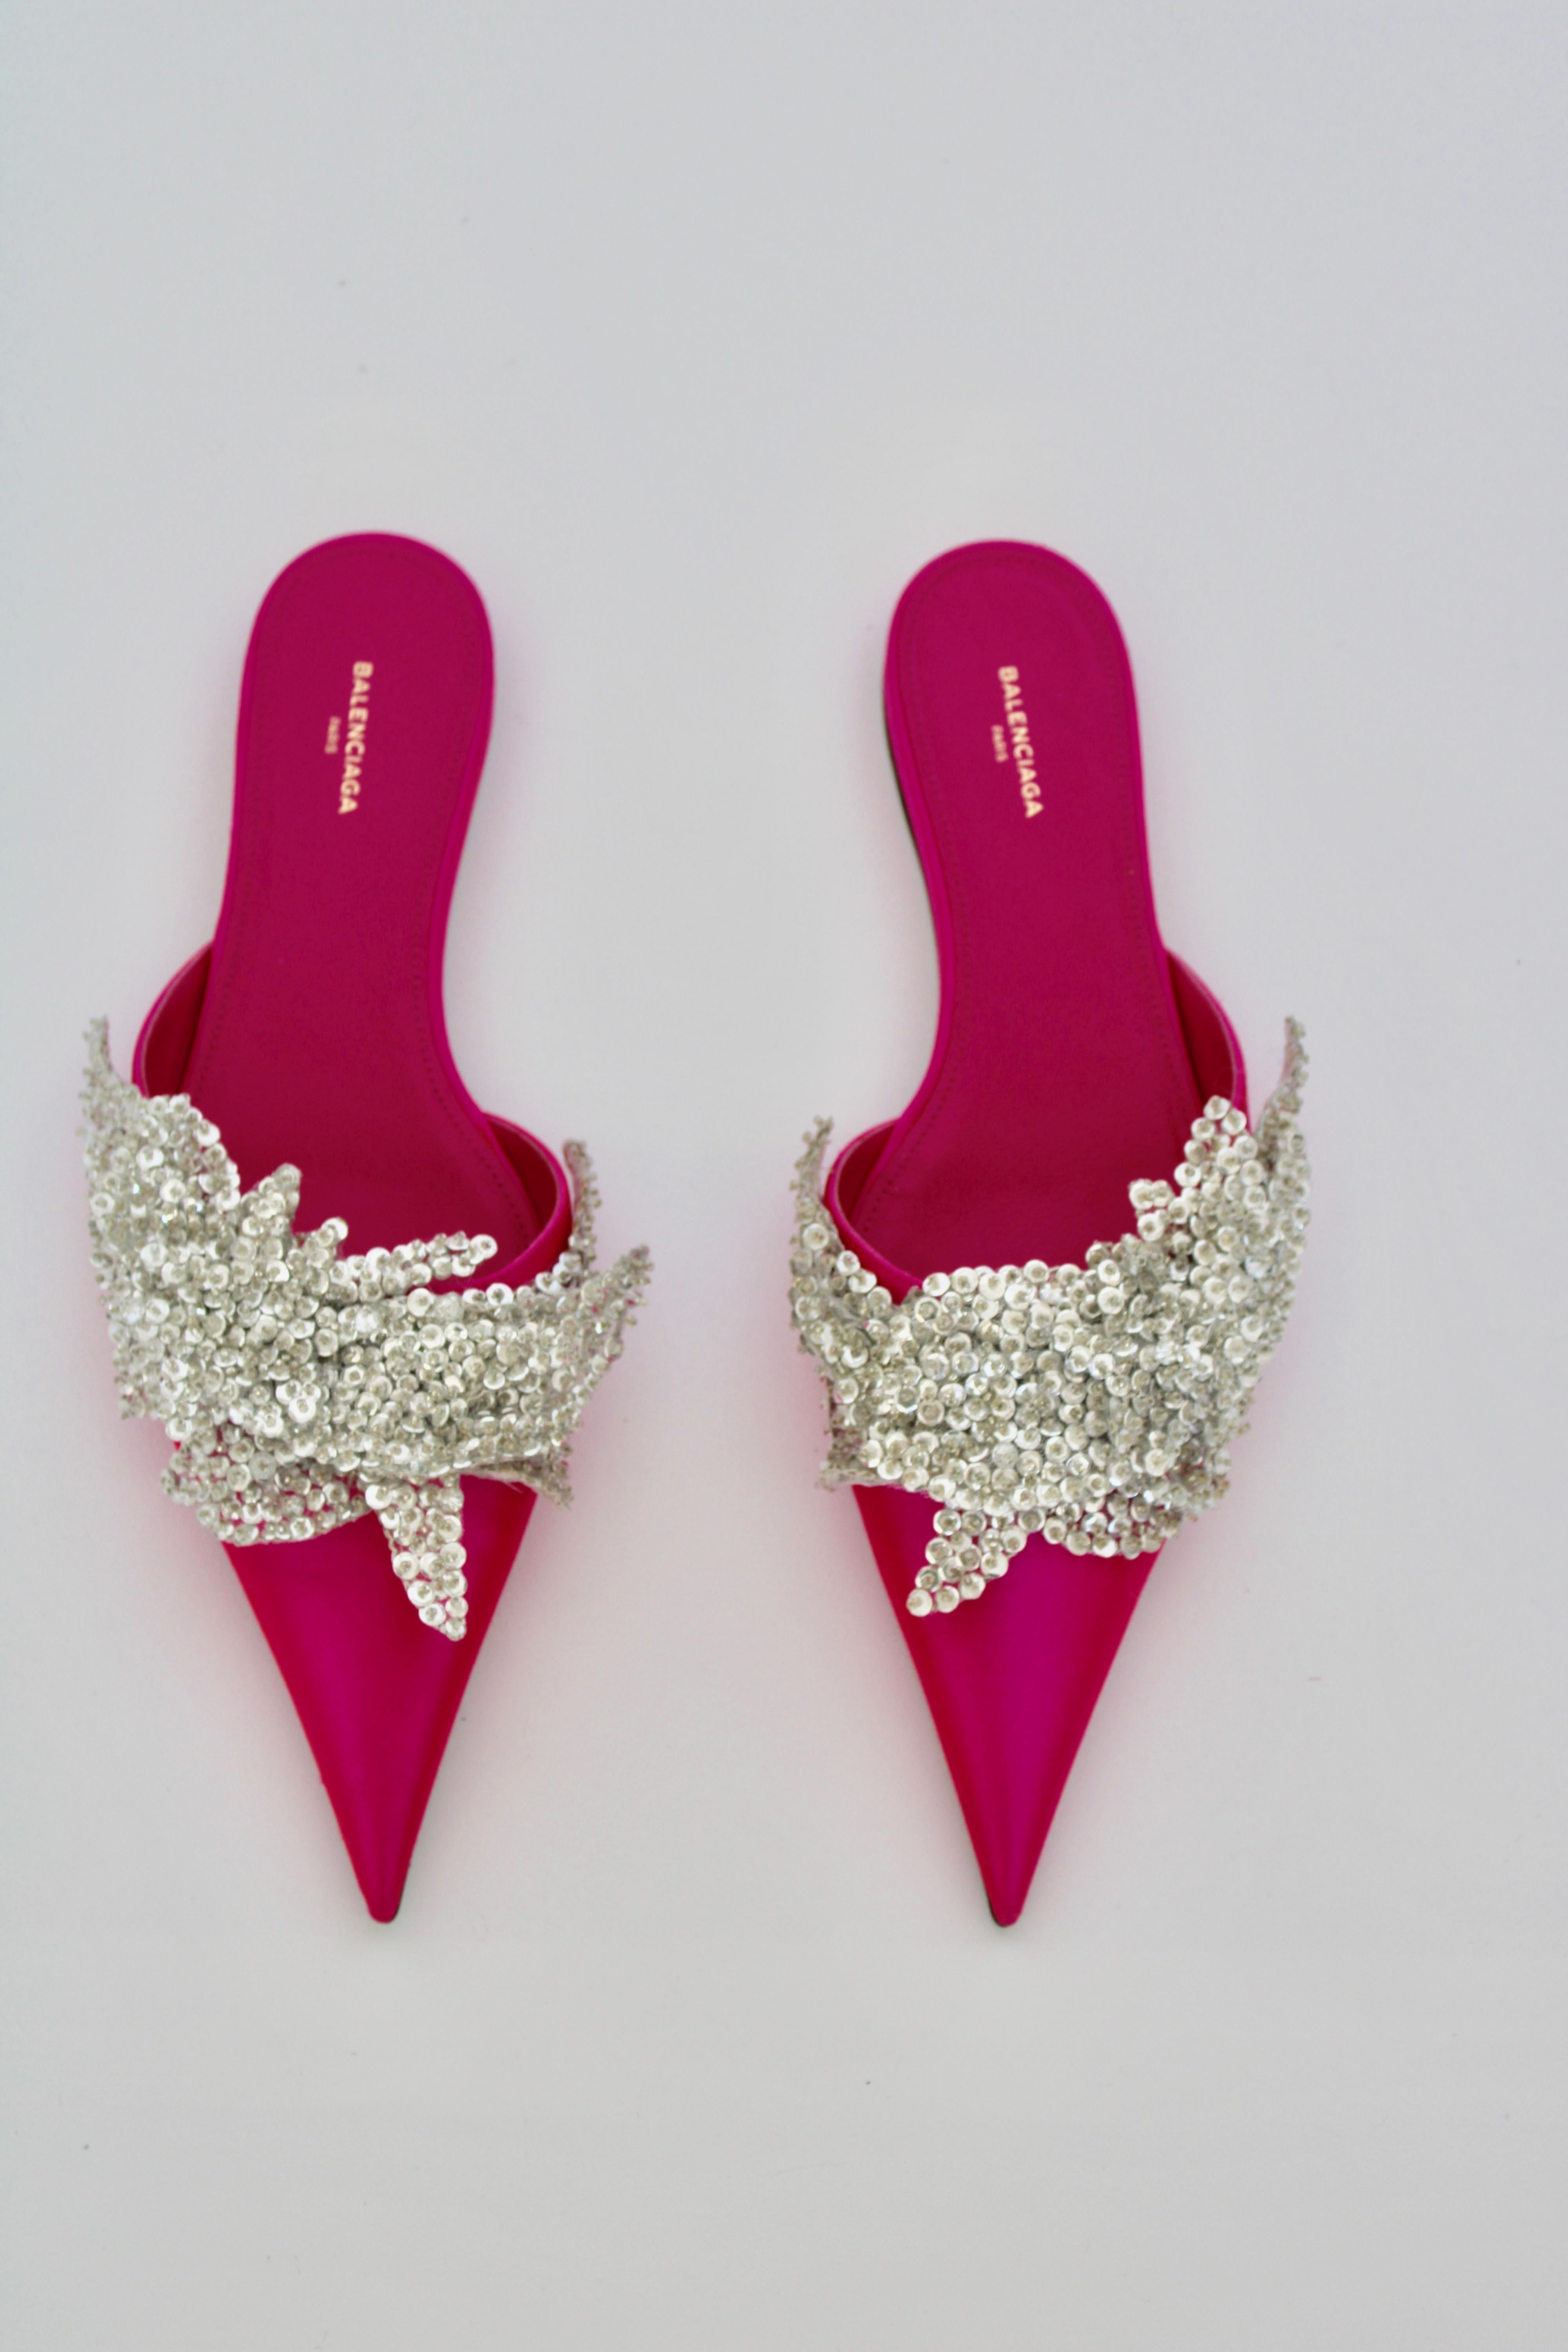 Pointed toe mule flat w/ crystal embellishment across the vamp. 